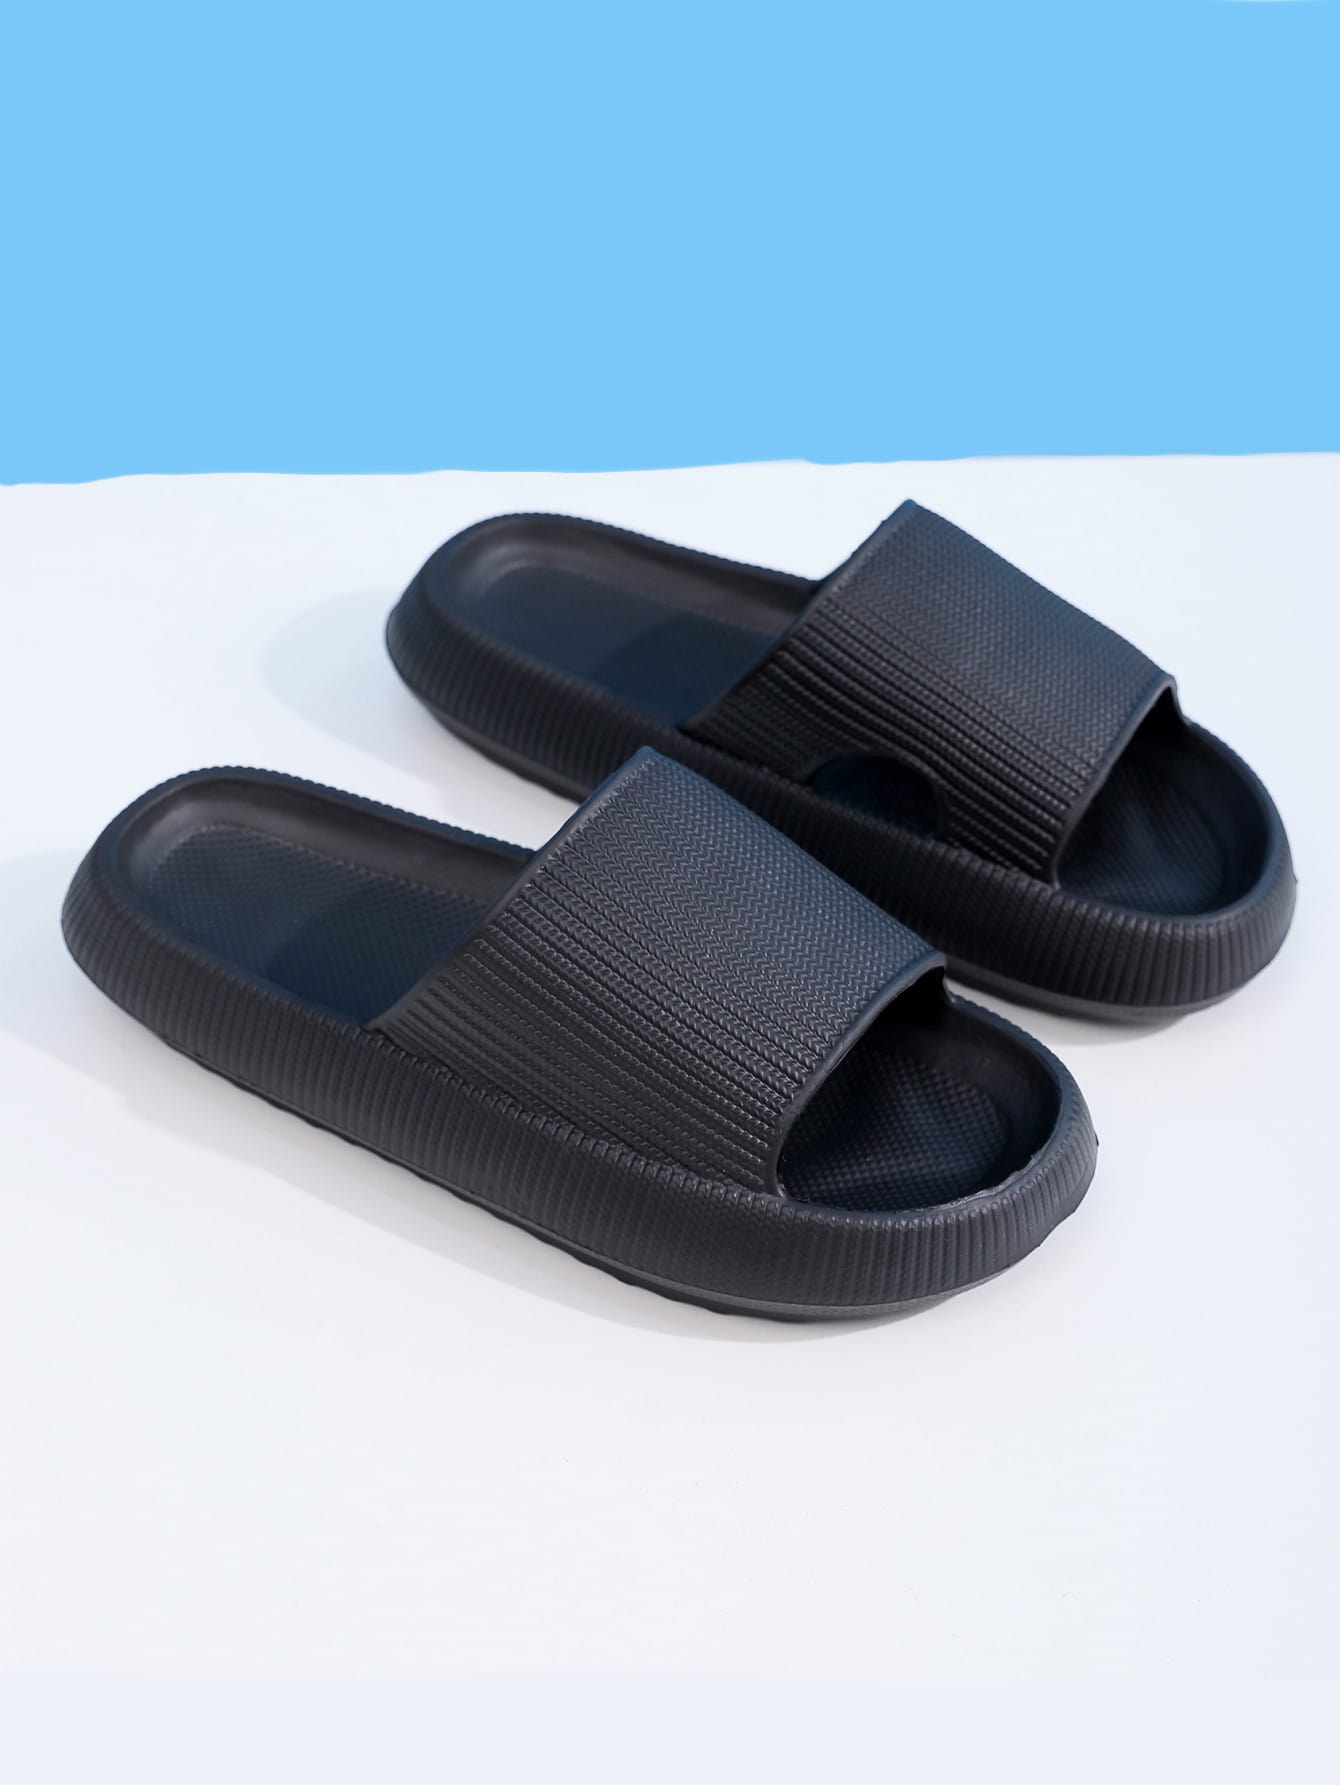 Men's INDOOR Casual Flat Slipper Sandals for Indoor Bathing and Home Use